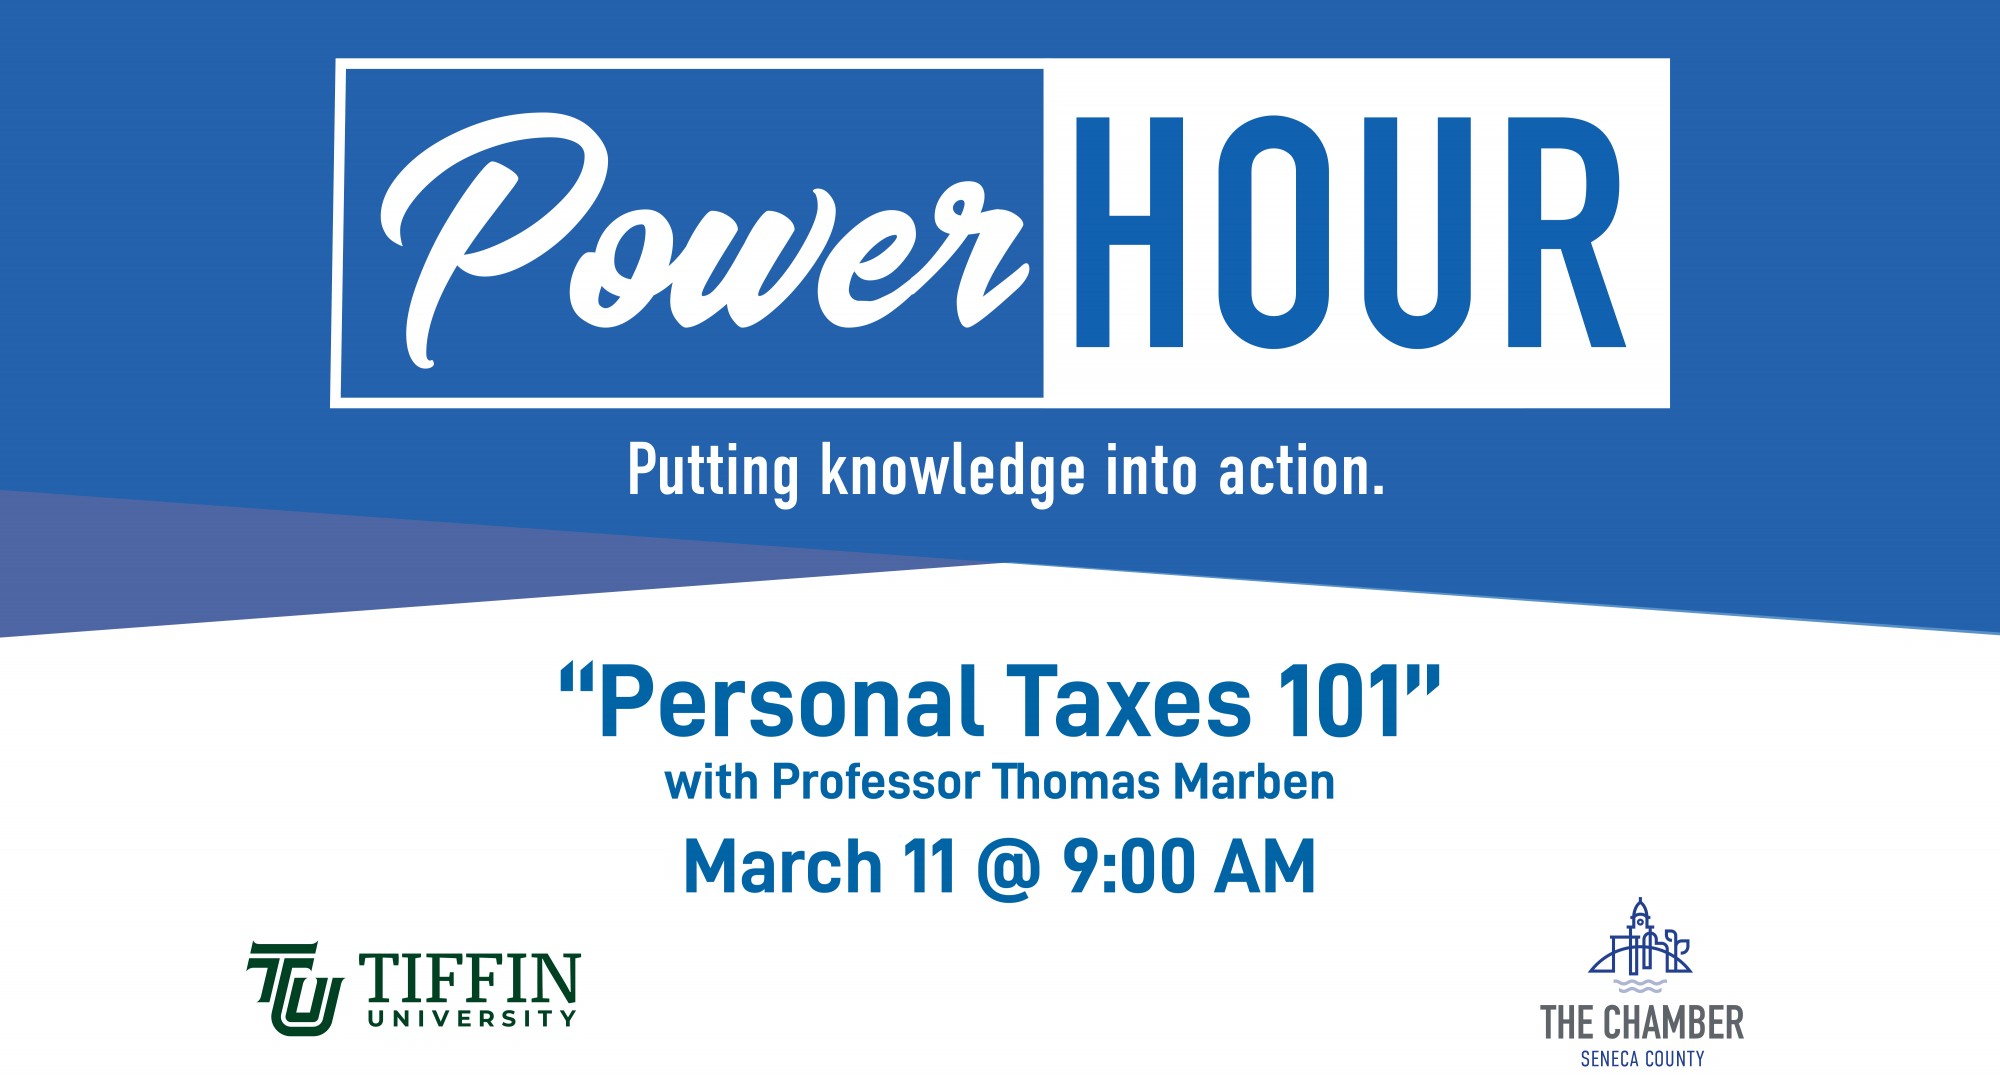 Power Hour:  Personal Taxes 101